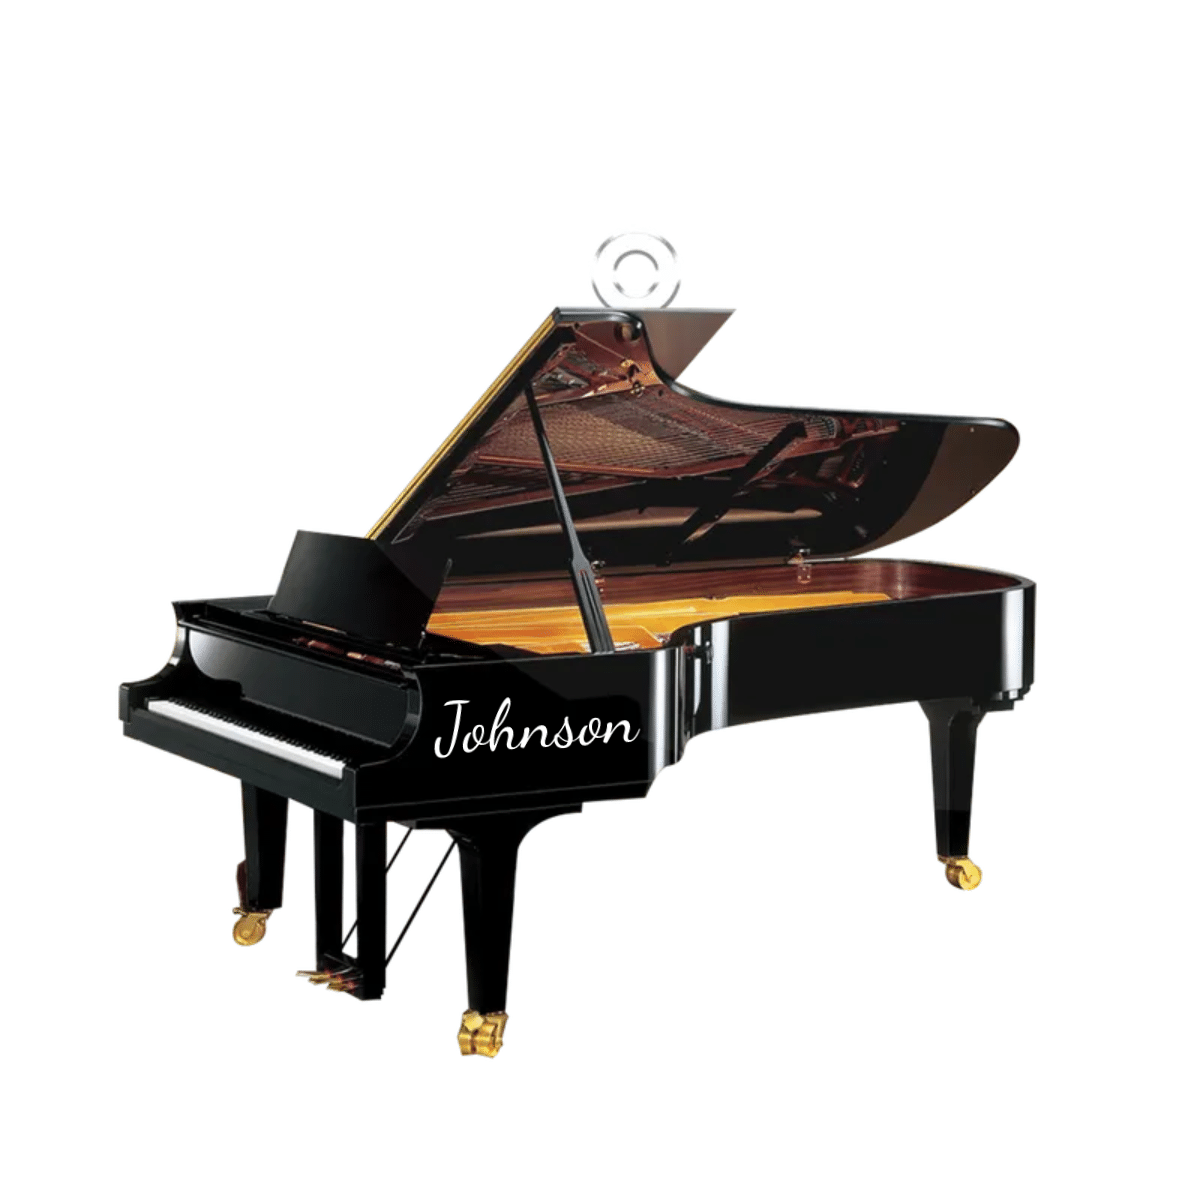 Personalized Piano Acrylic Keychain for Piano Player/ Gift for Daughter and Son Piano Keychain